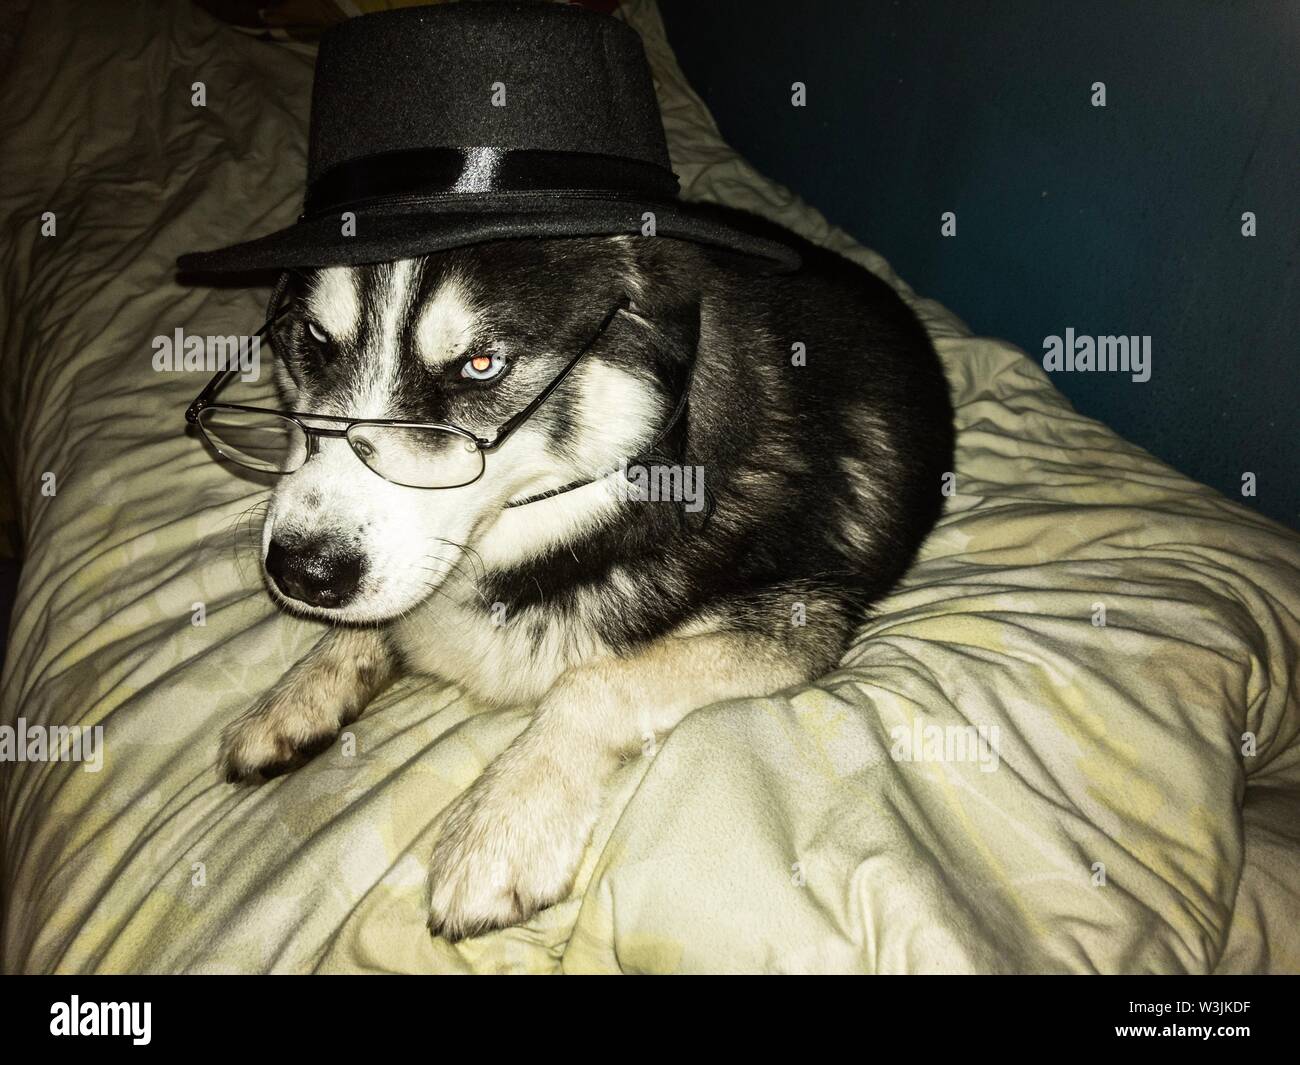 intelligent dog with glasses and black cap laying on bed Stock Photo